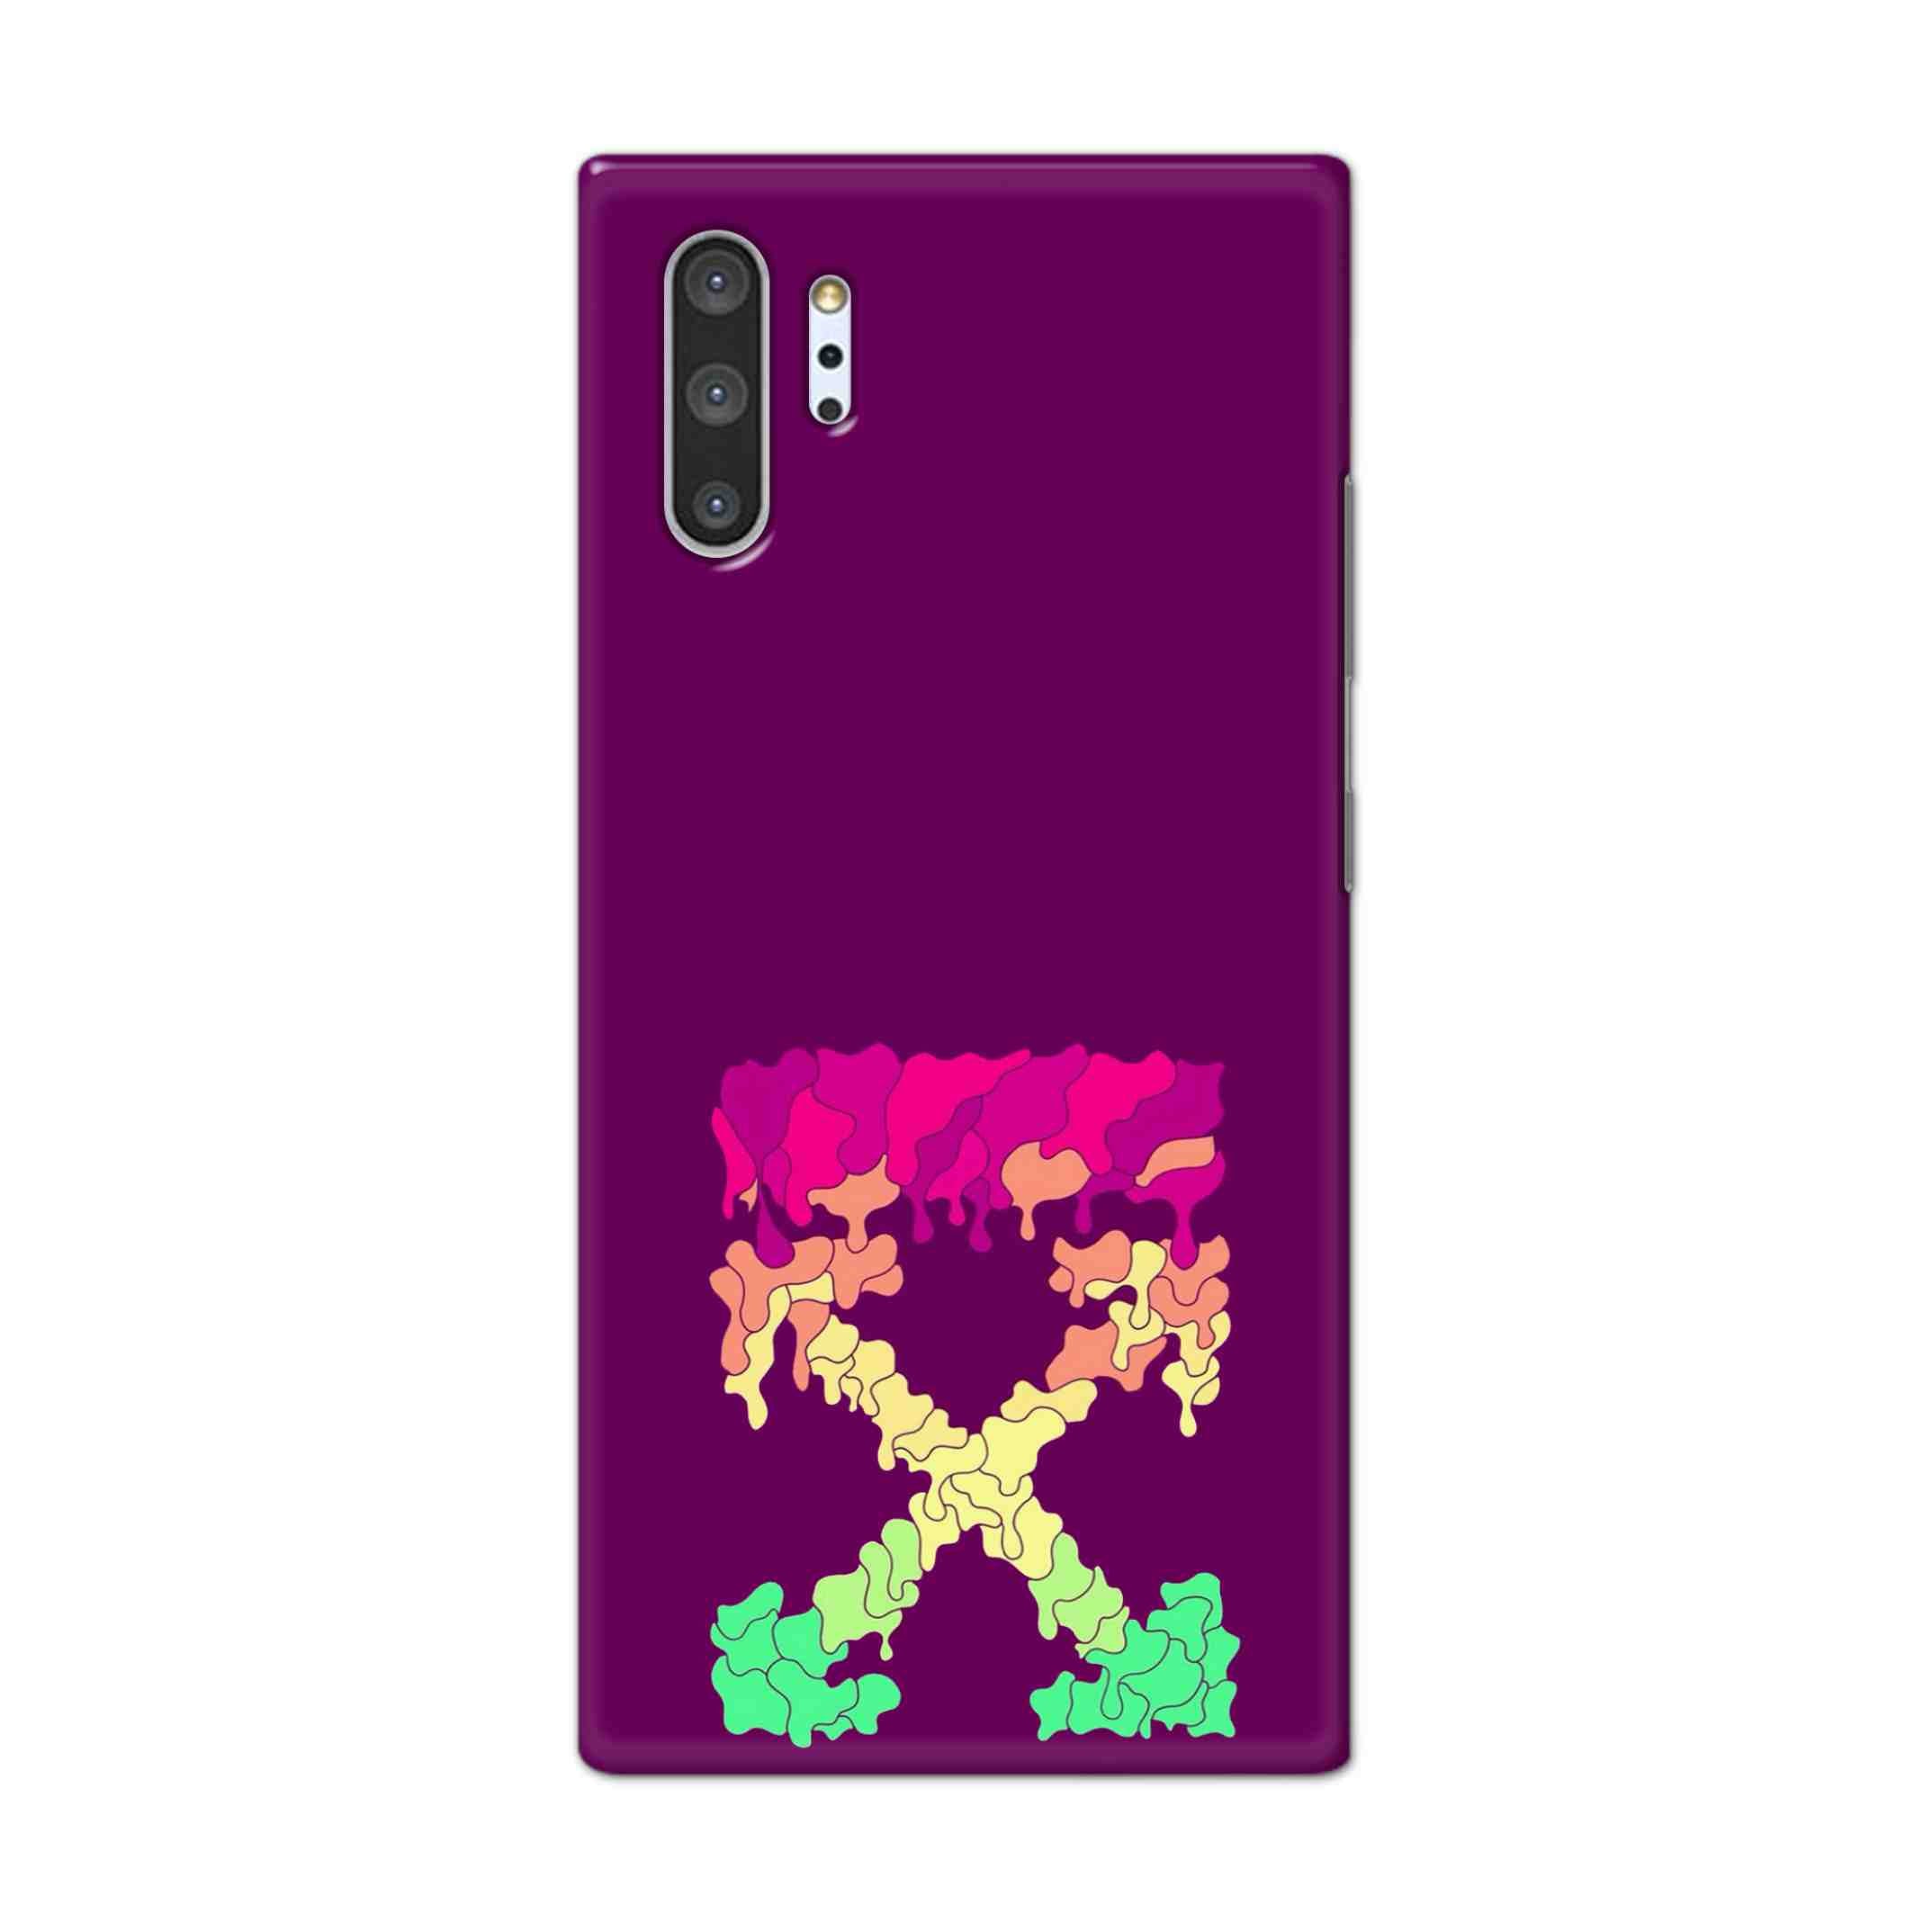 Buy X.O Hard Back Mobile Phone Case Cover For Samsung Galaxy Note 10 Pro Online